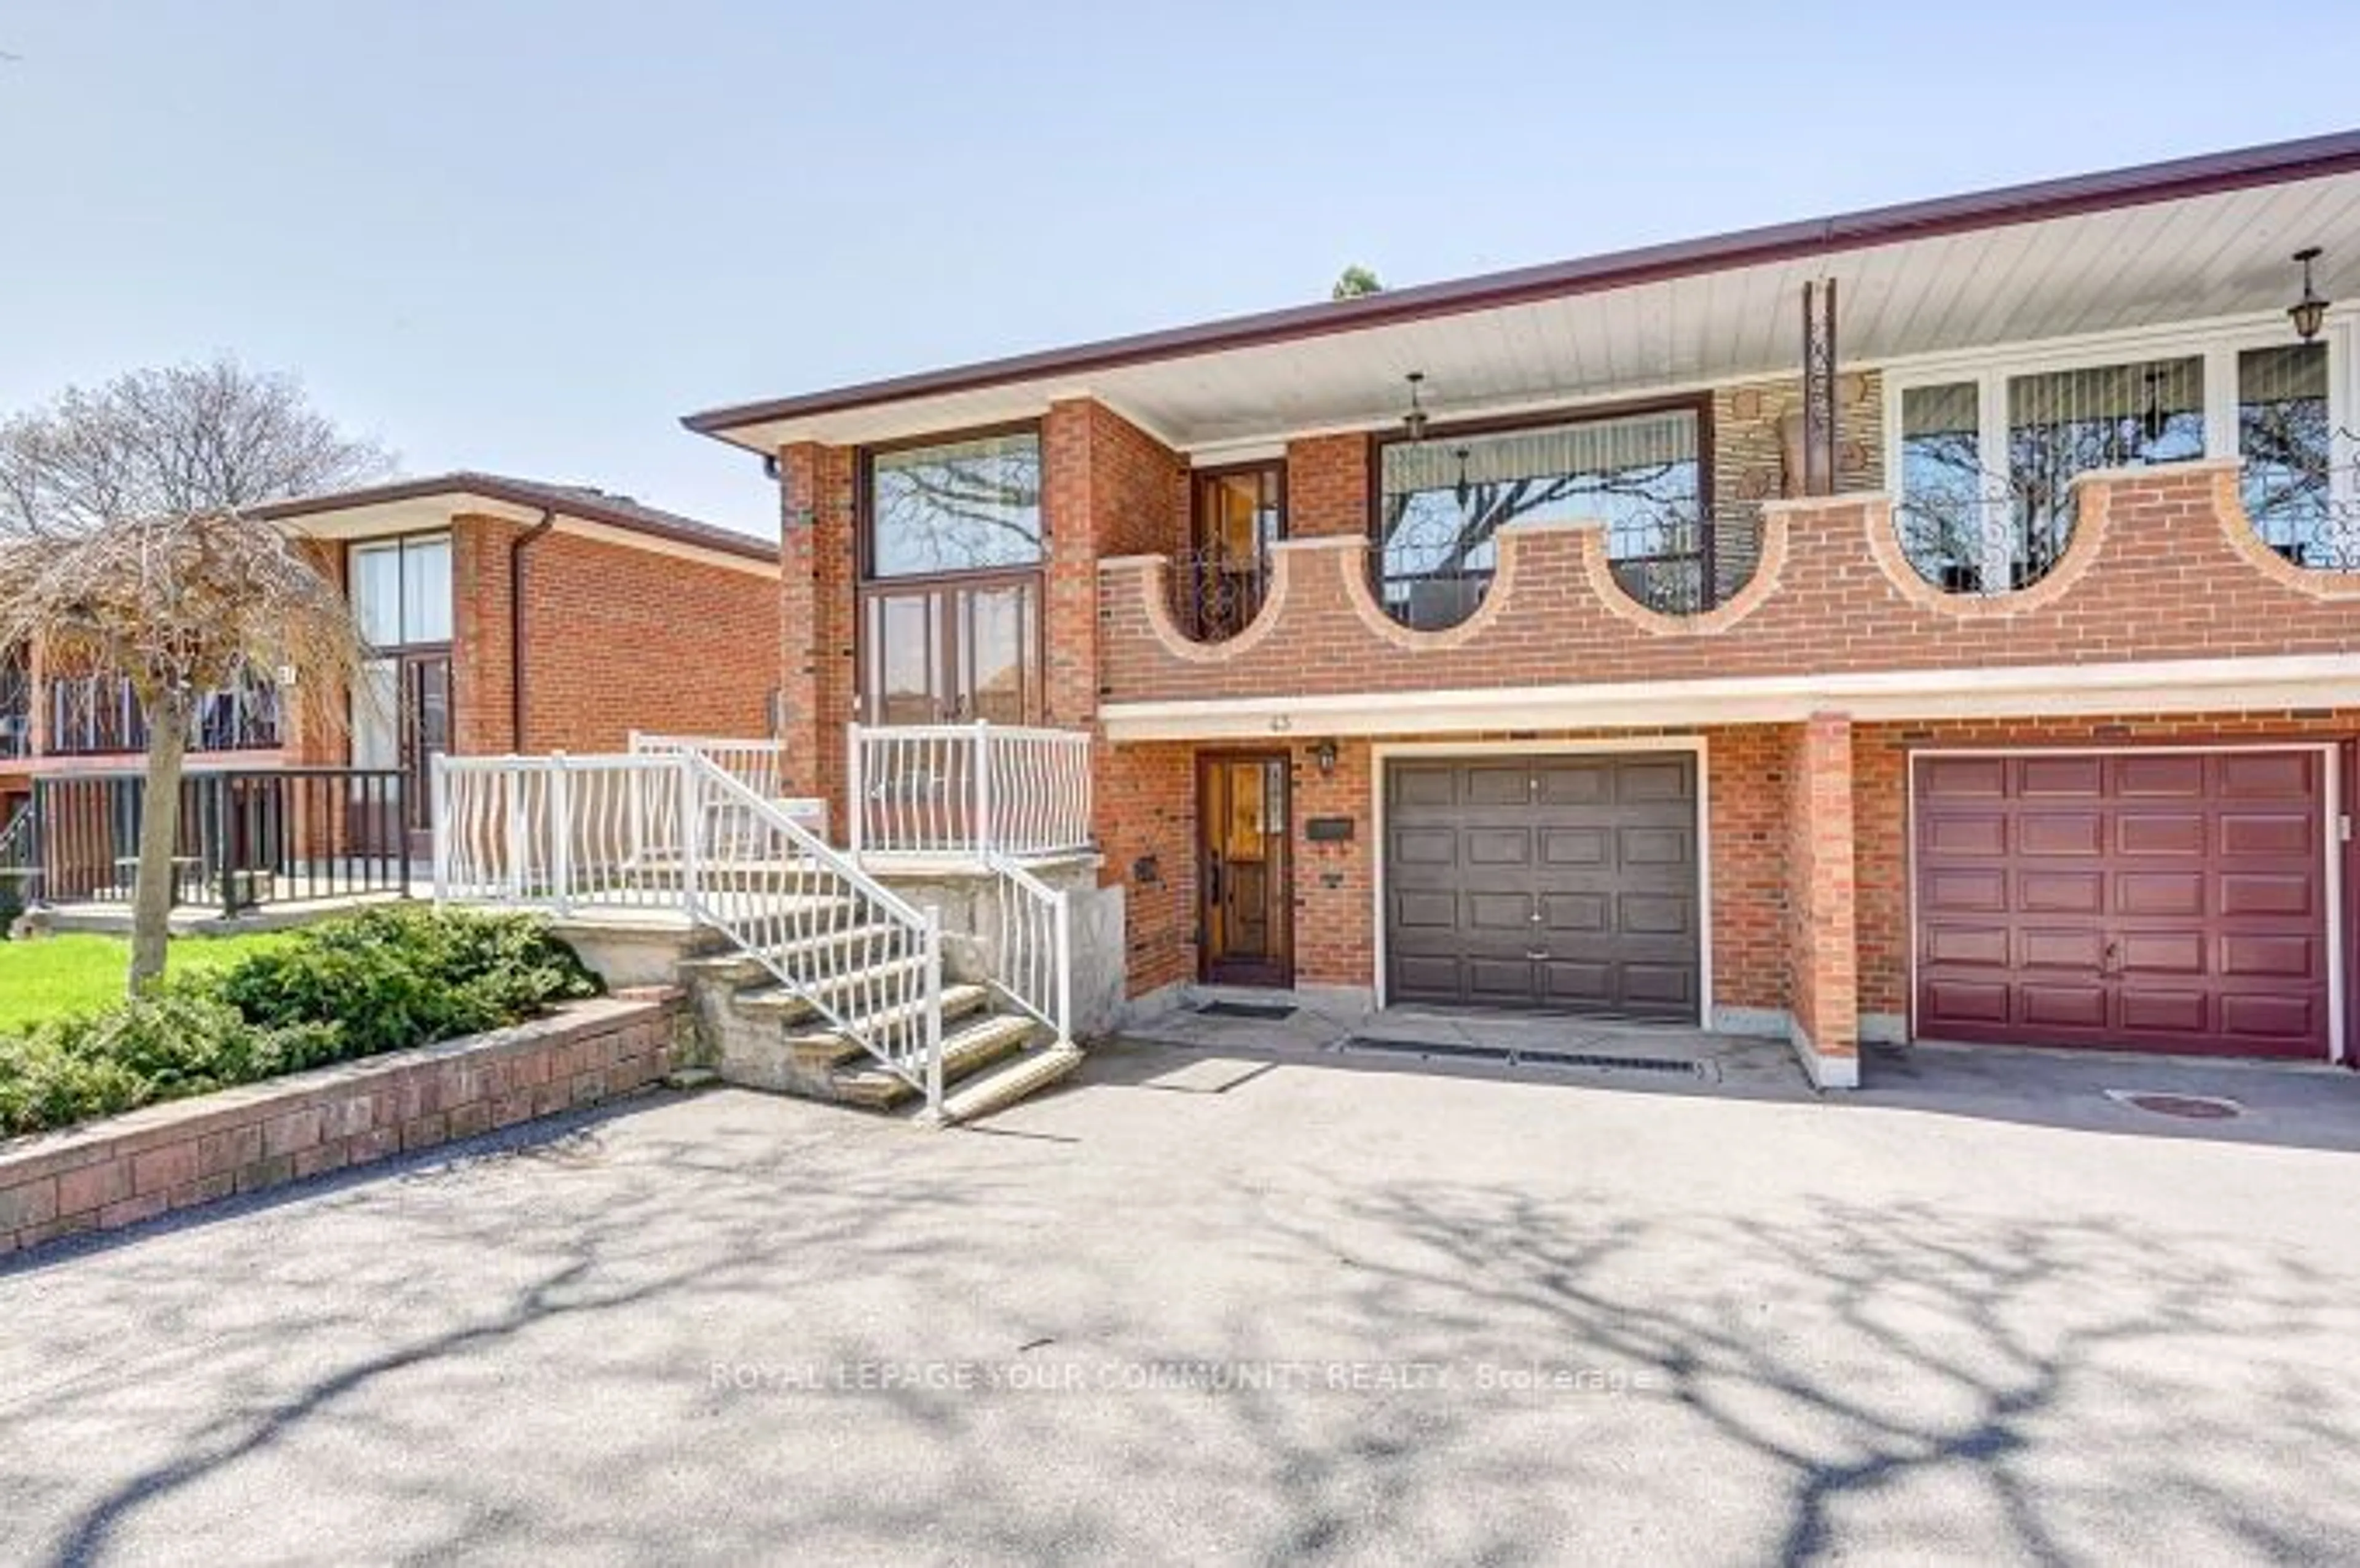 Home with brick exterior material for 43 Starview Dr, Toronto Ontario M9M 1K7